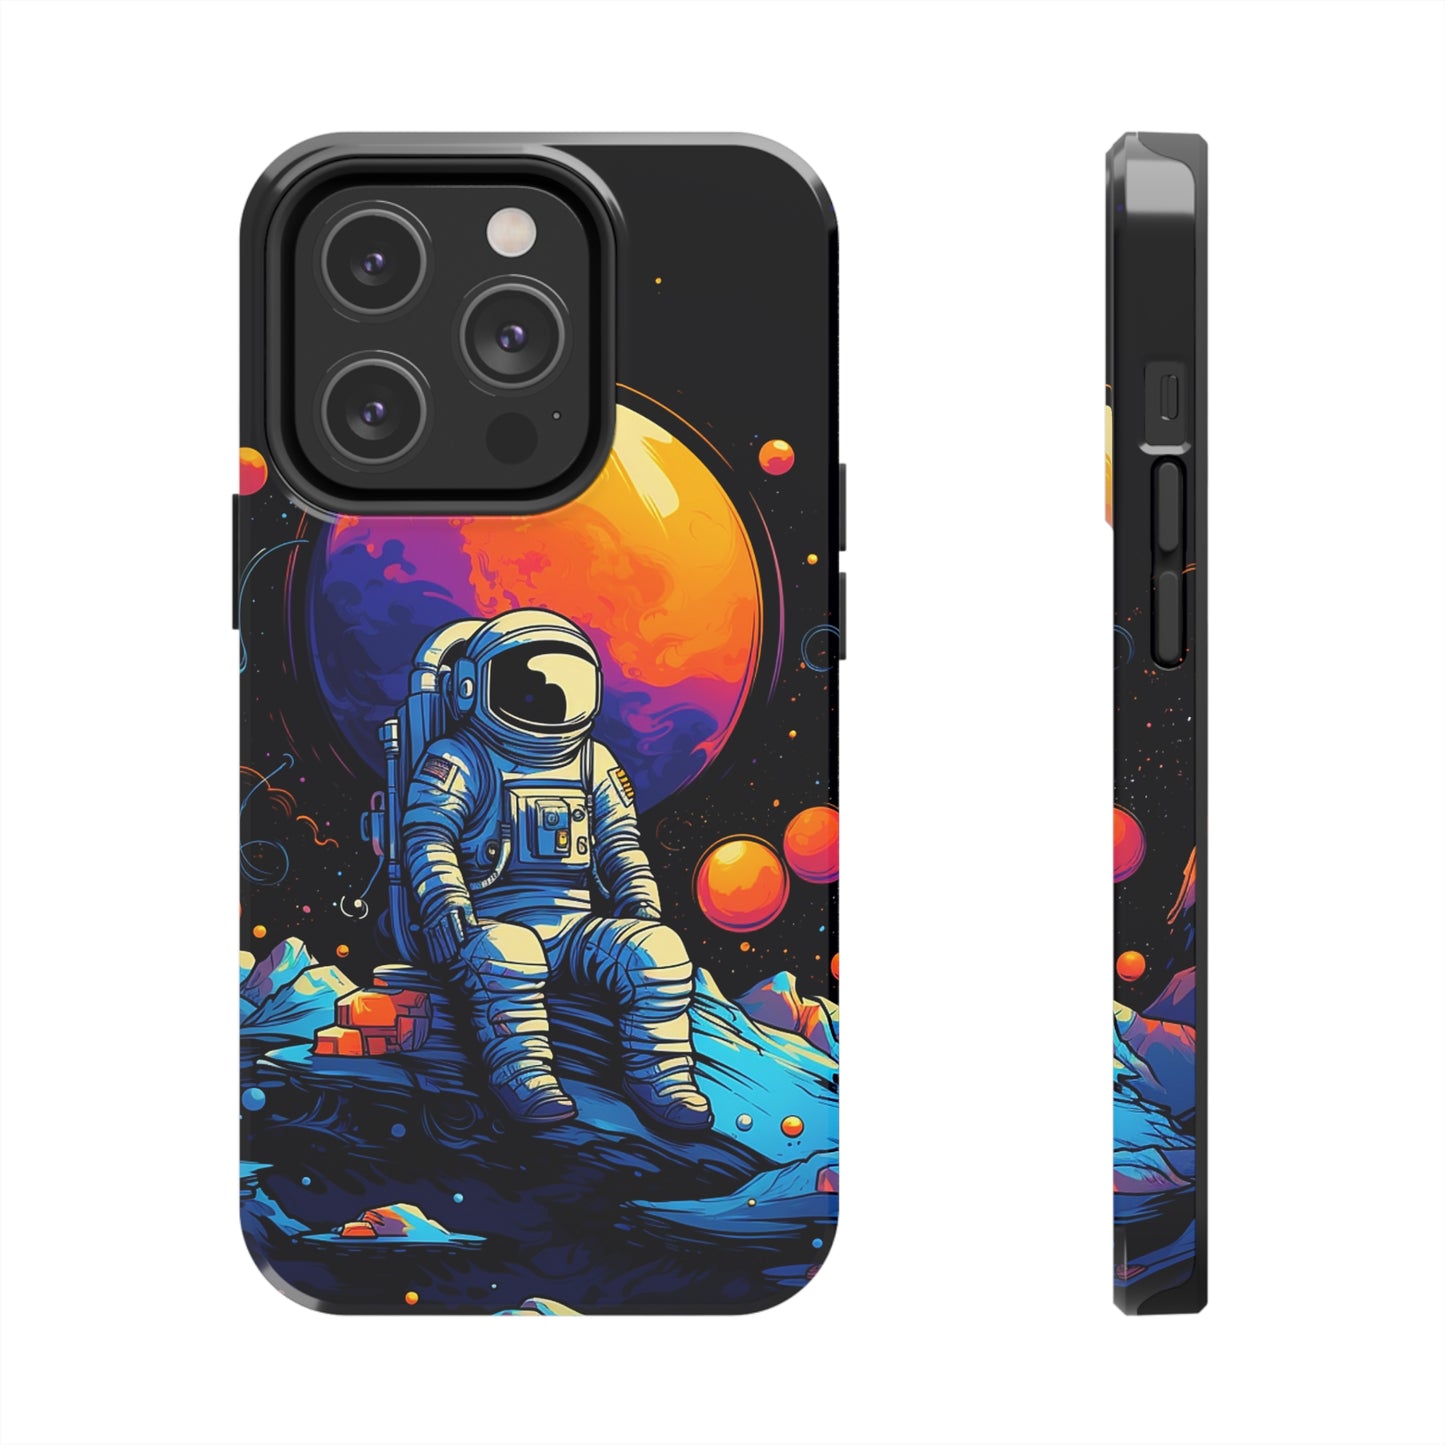 Galactic Solitude (iPhone Case 11-15)Safeguard Your iPhone in Style with RIMA Tough Cases. Designed for iPhone 11-15, these cases offer the ultimate blend of sophistication and resilience. Eco-consciousRimaGallery